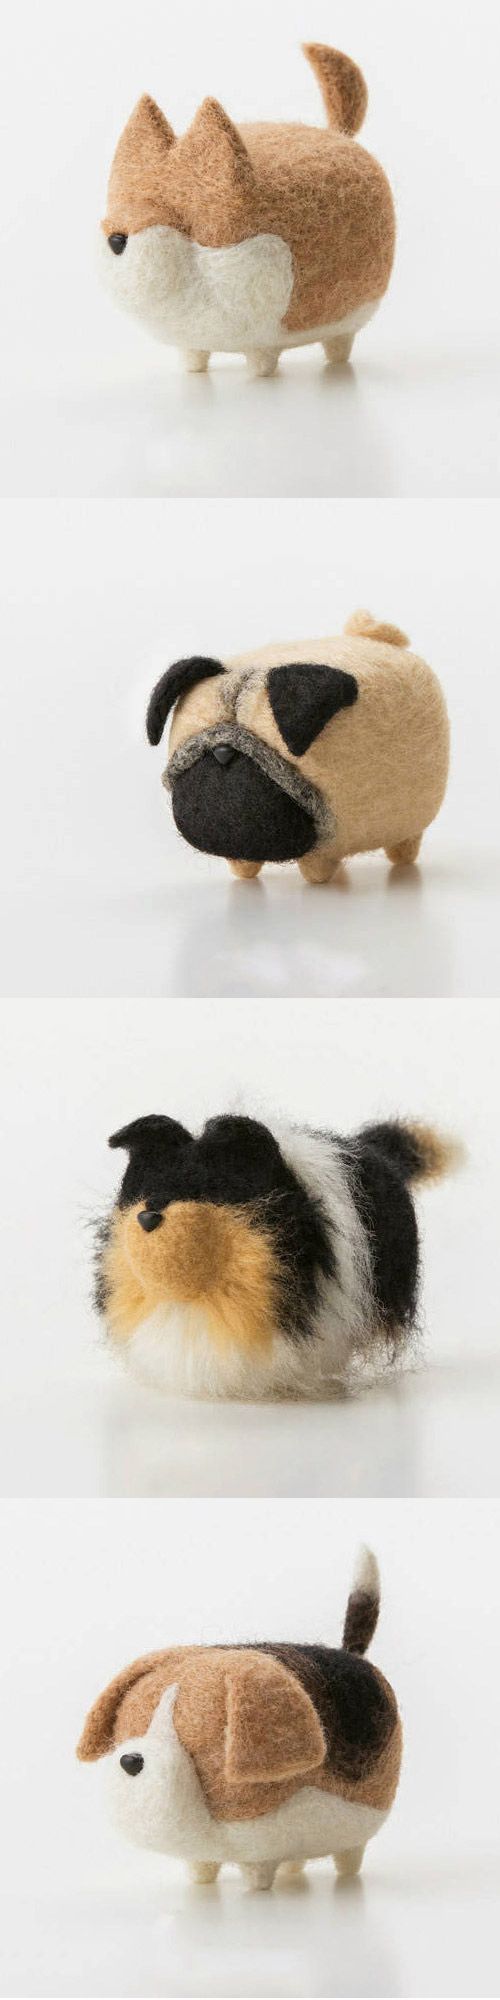 Handmade felted felting project cute animal dogs puppy felted wool doll